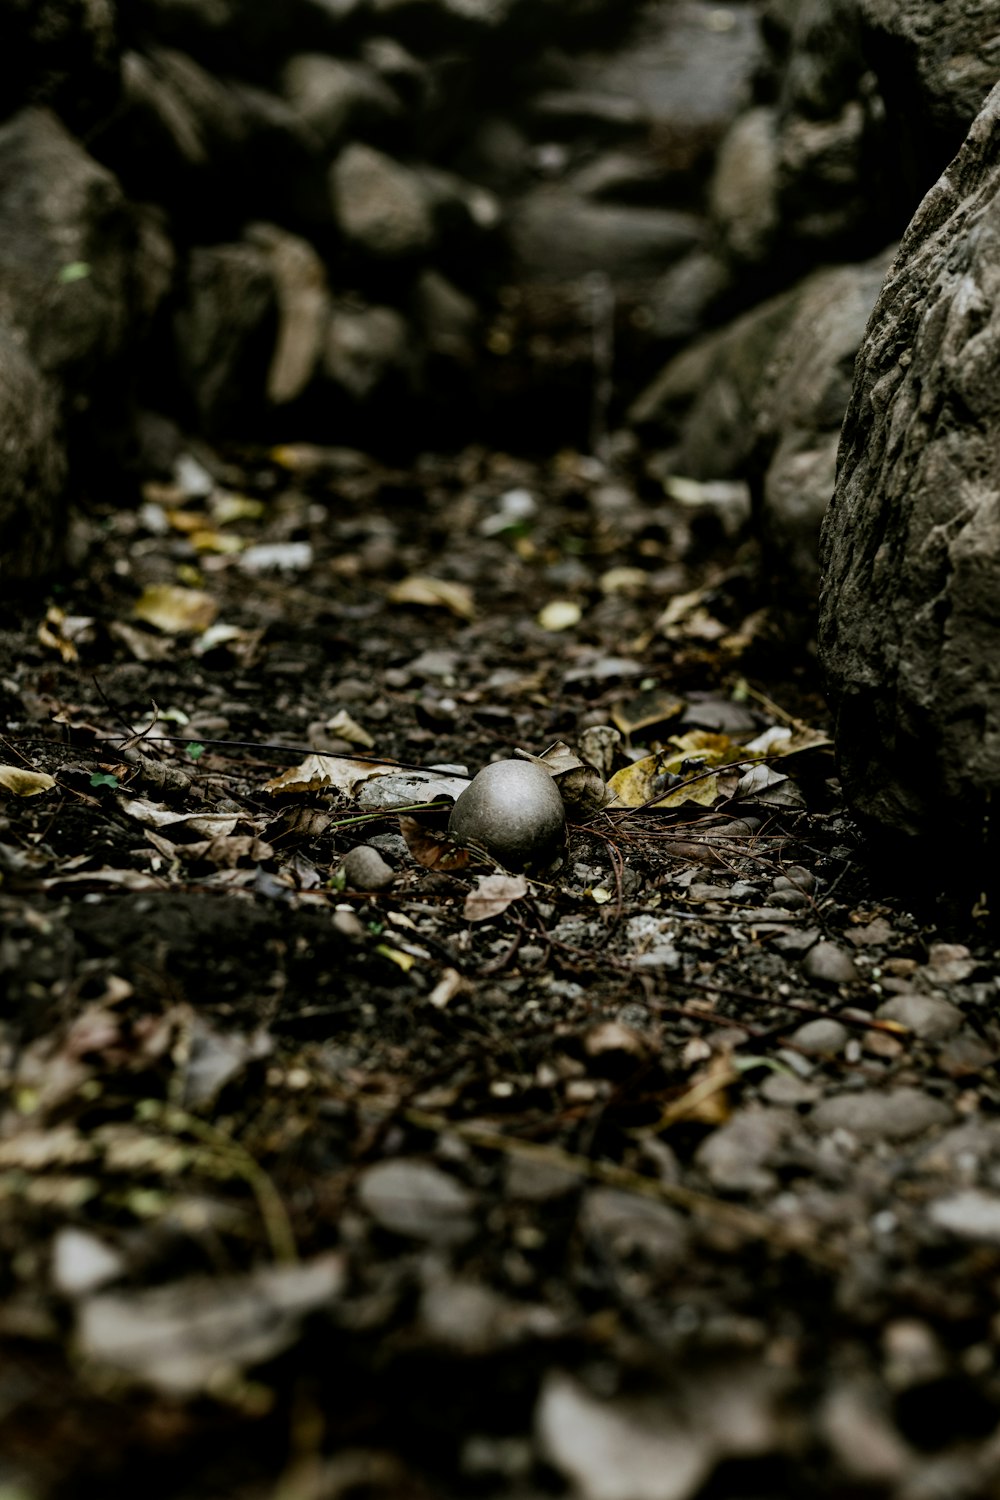 a ball laying on the ground next to some rocks